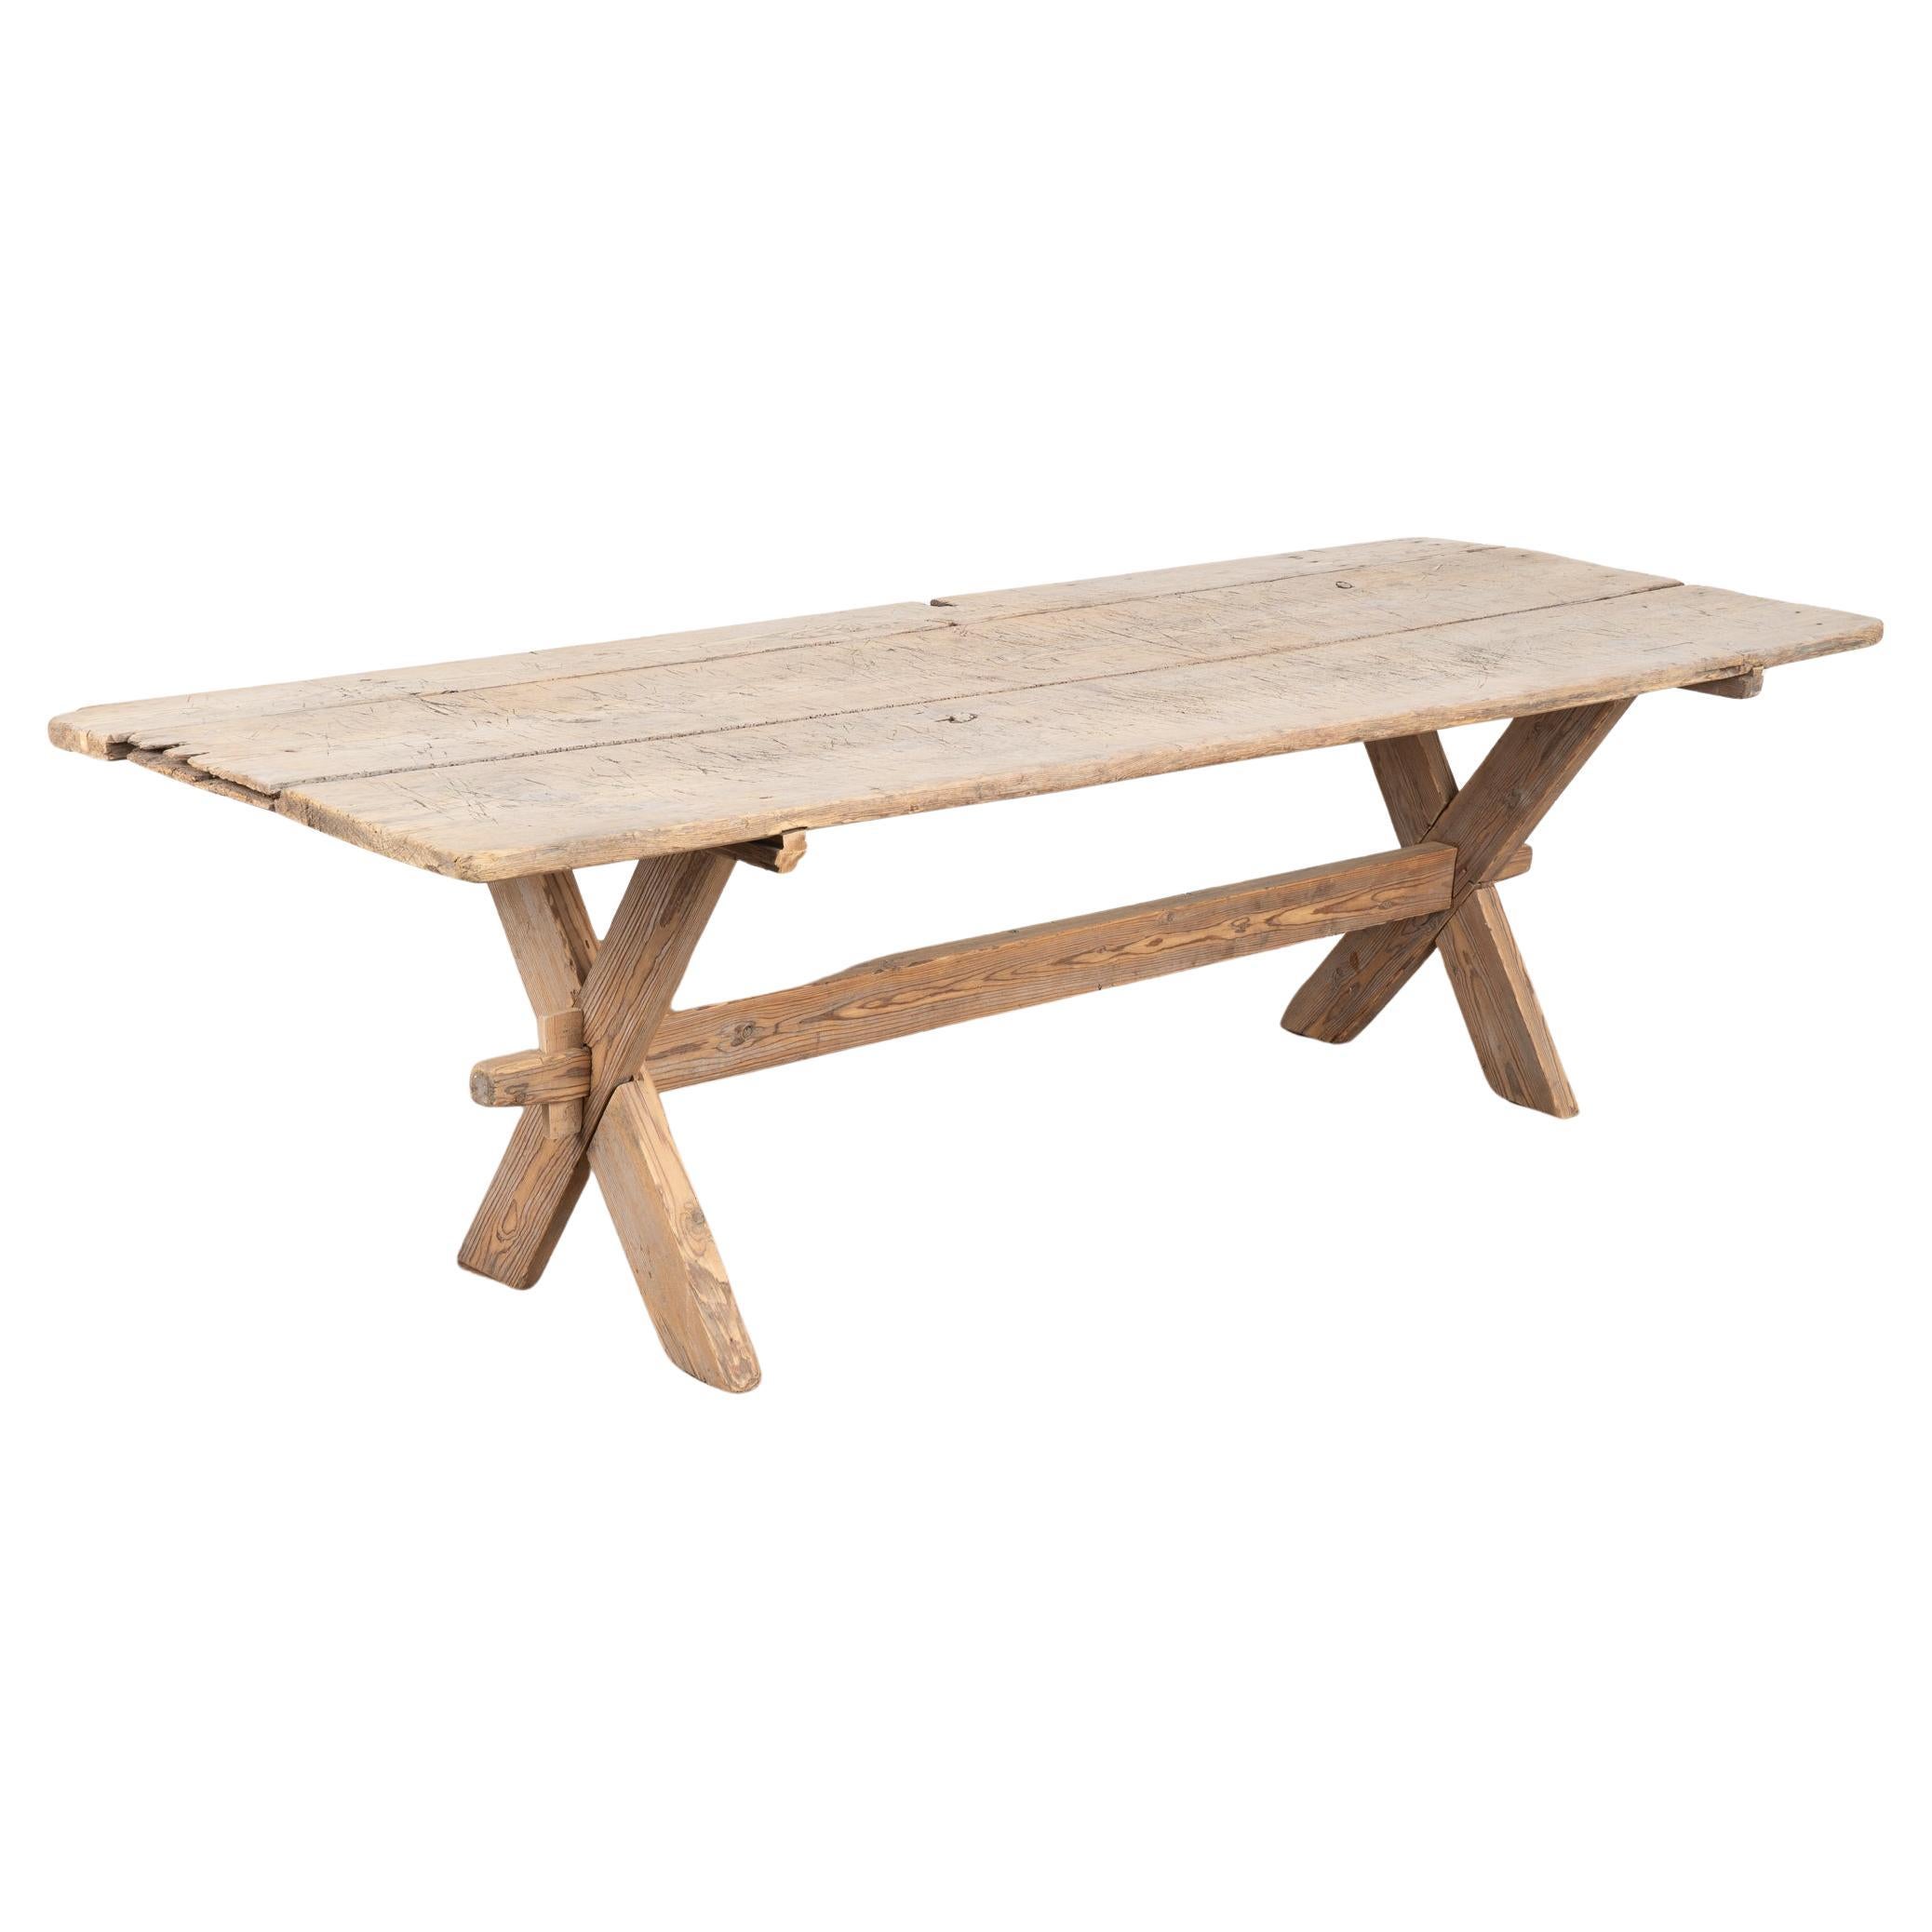  Rustic Farm Dining or Kitchen Table, Sweden circa 1800's For Sale